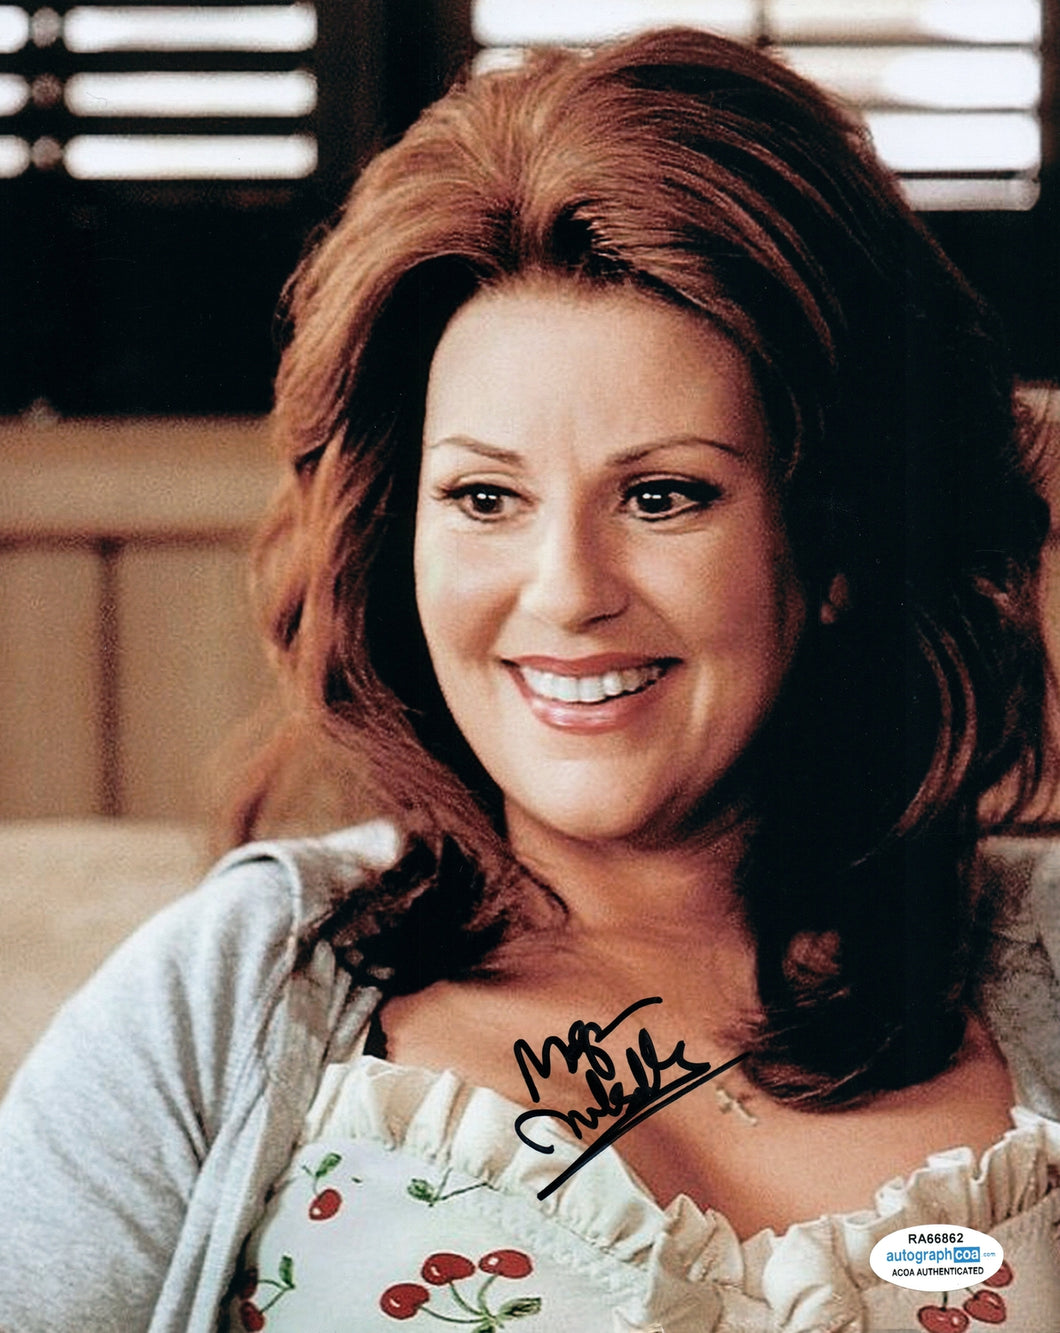 Megan Mullally Autographed Signed 8x10 Photo